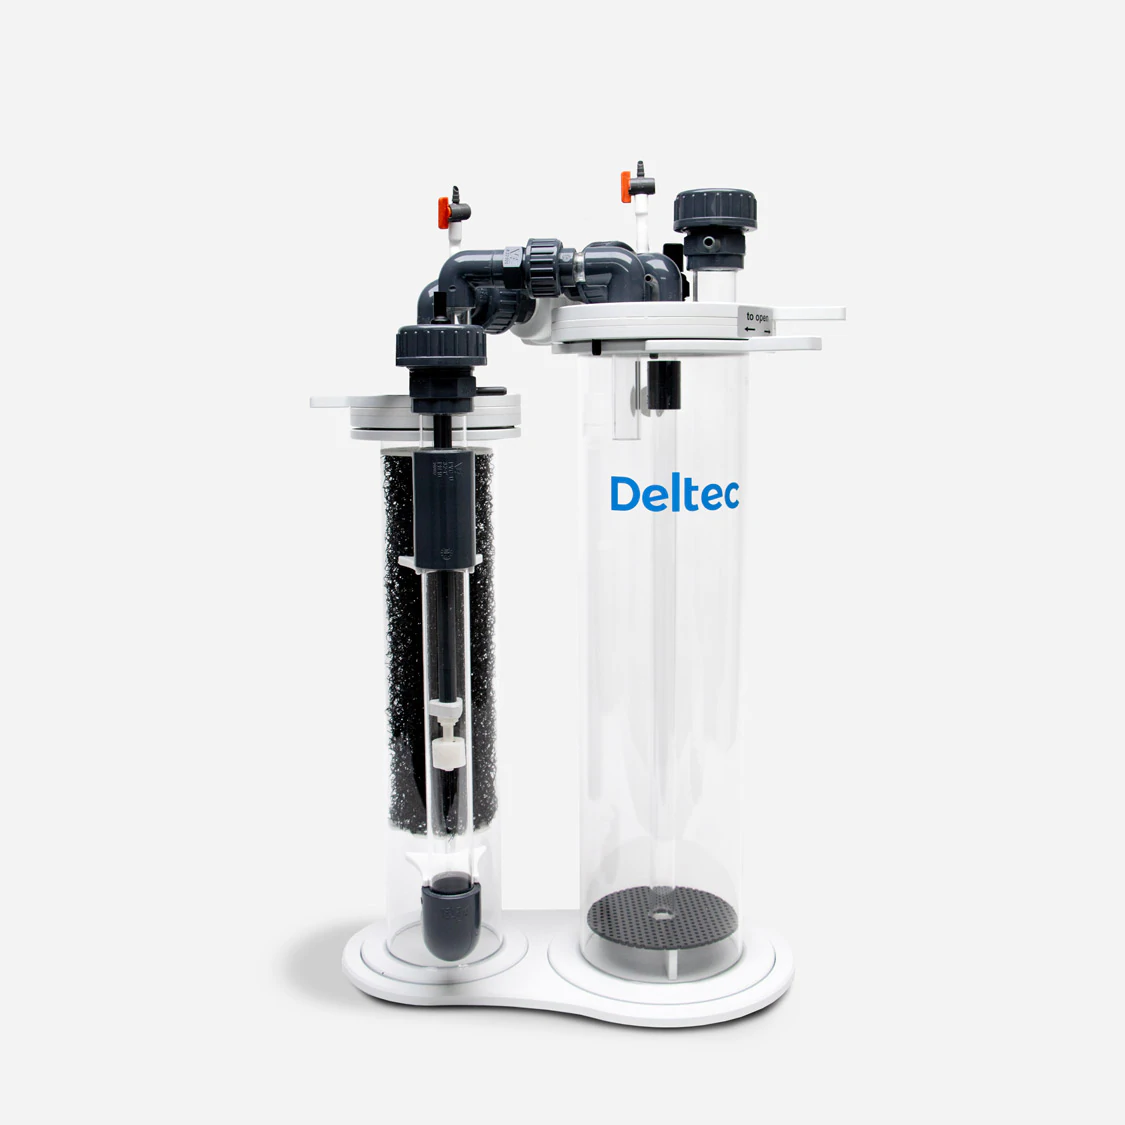 Deltec CRTT1500 Twin-Tech Calcium Reactor - Up to 400 gallons